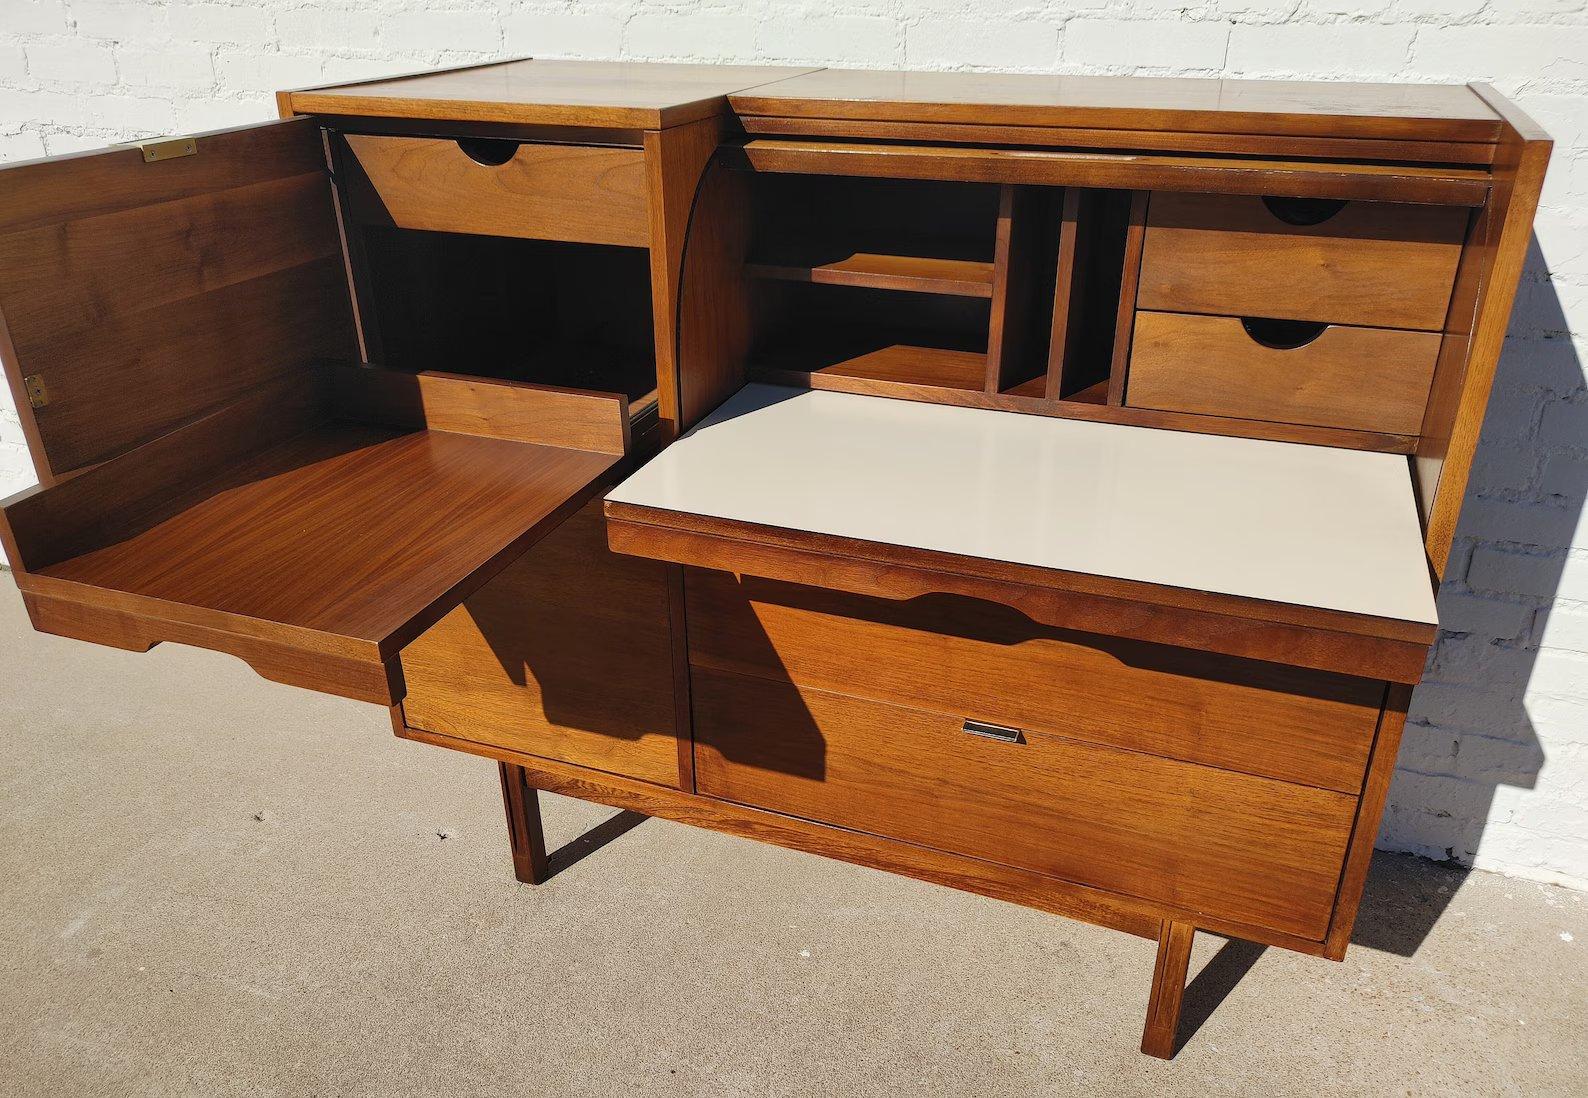 Mid Century Modern Hooker Walnut Roll Top Secretary

Above average vintage condition and structurally sound. Has some expected slight finish wear and scratching. Top has a couple areas with slight finish crinkling. Outdoor listing pictures might